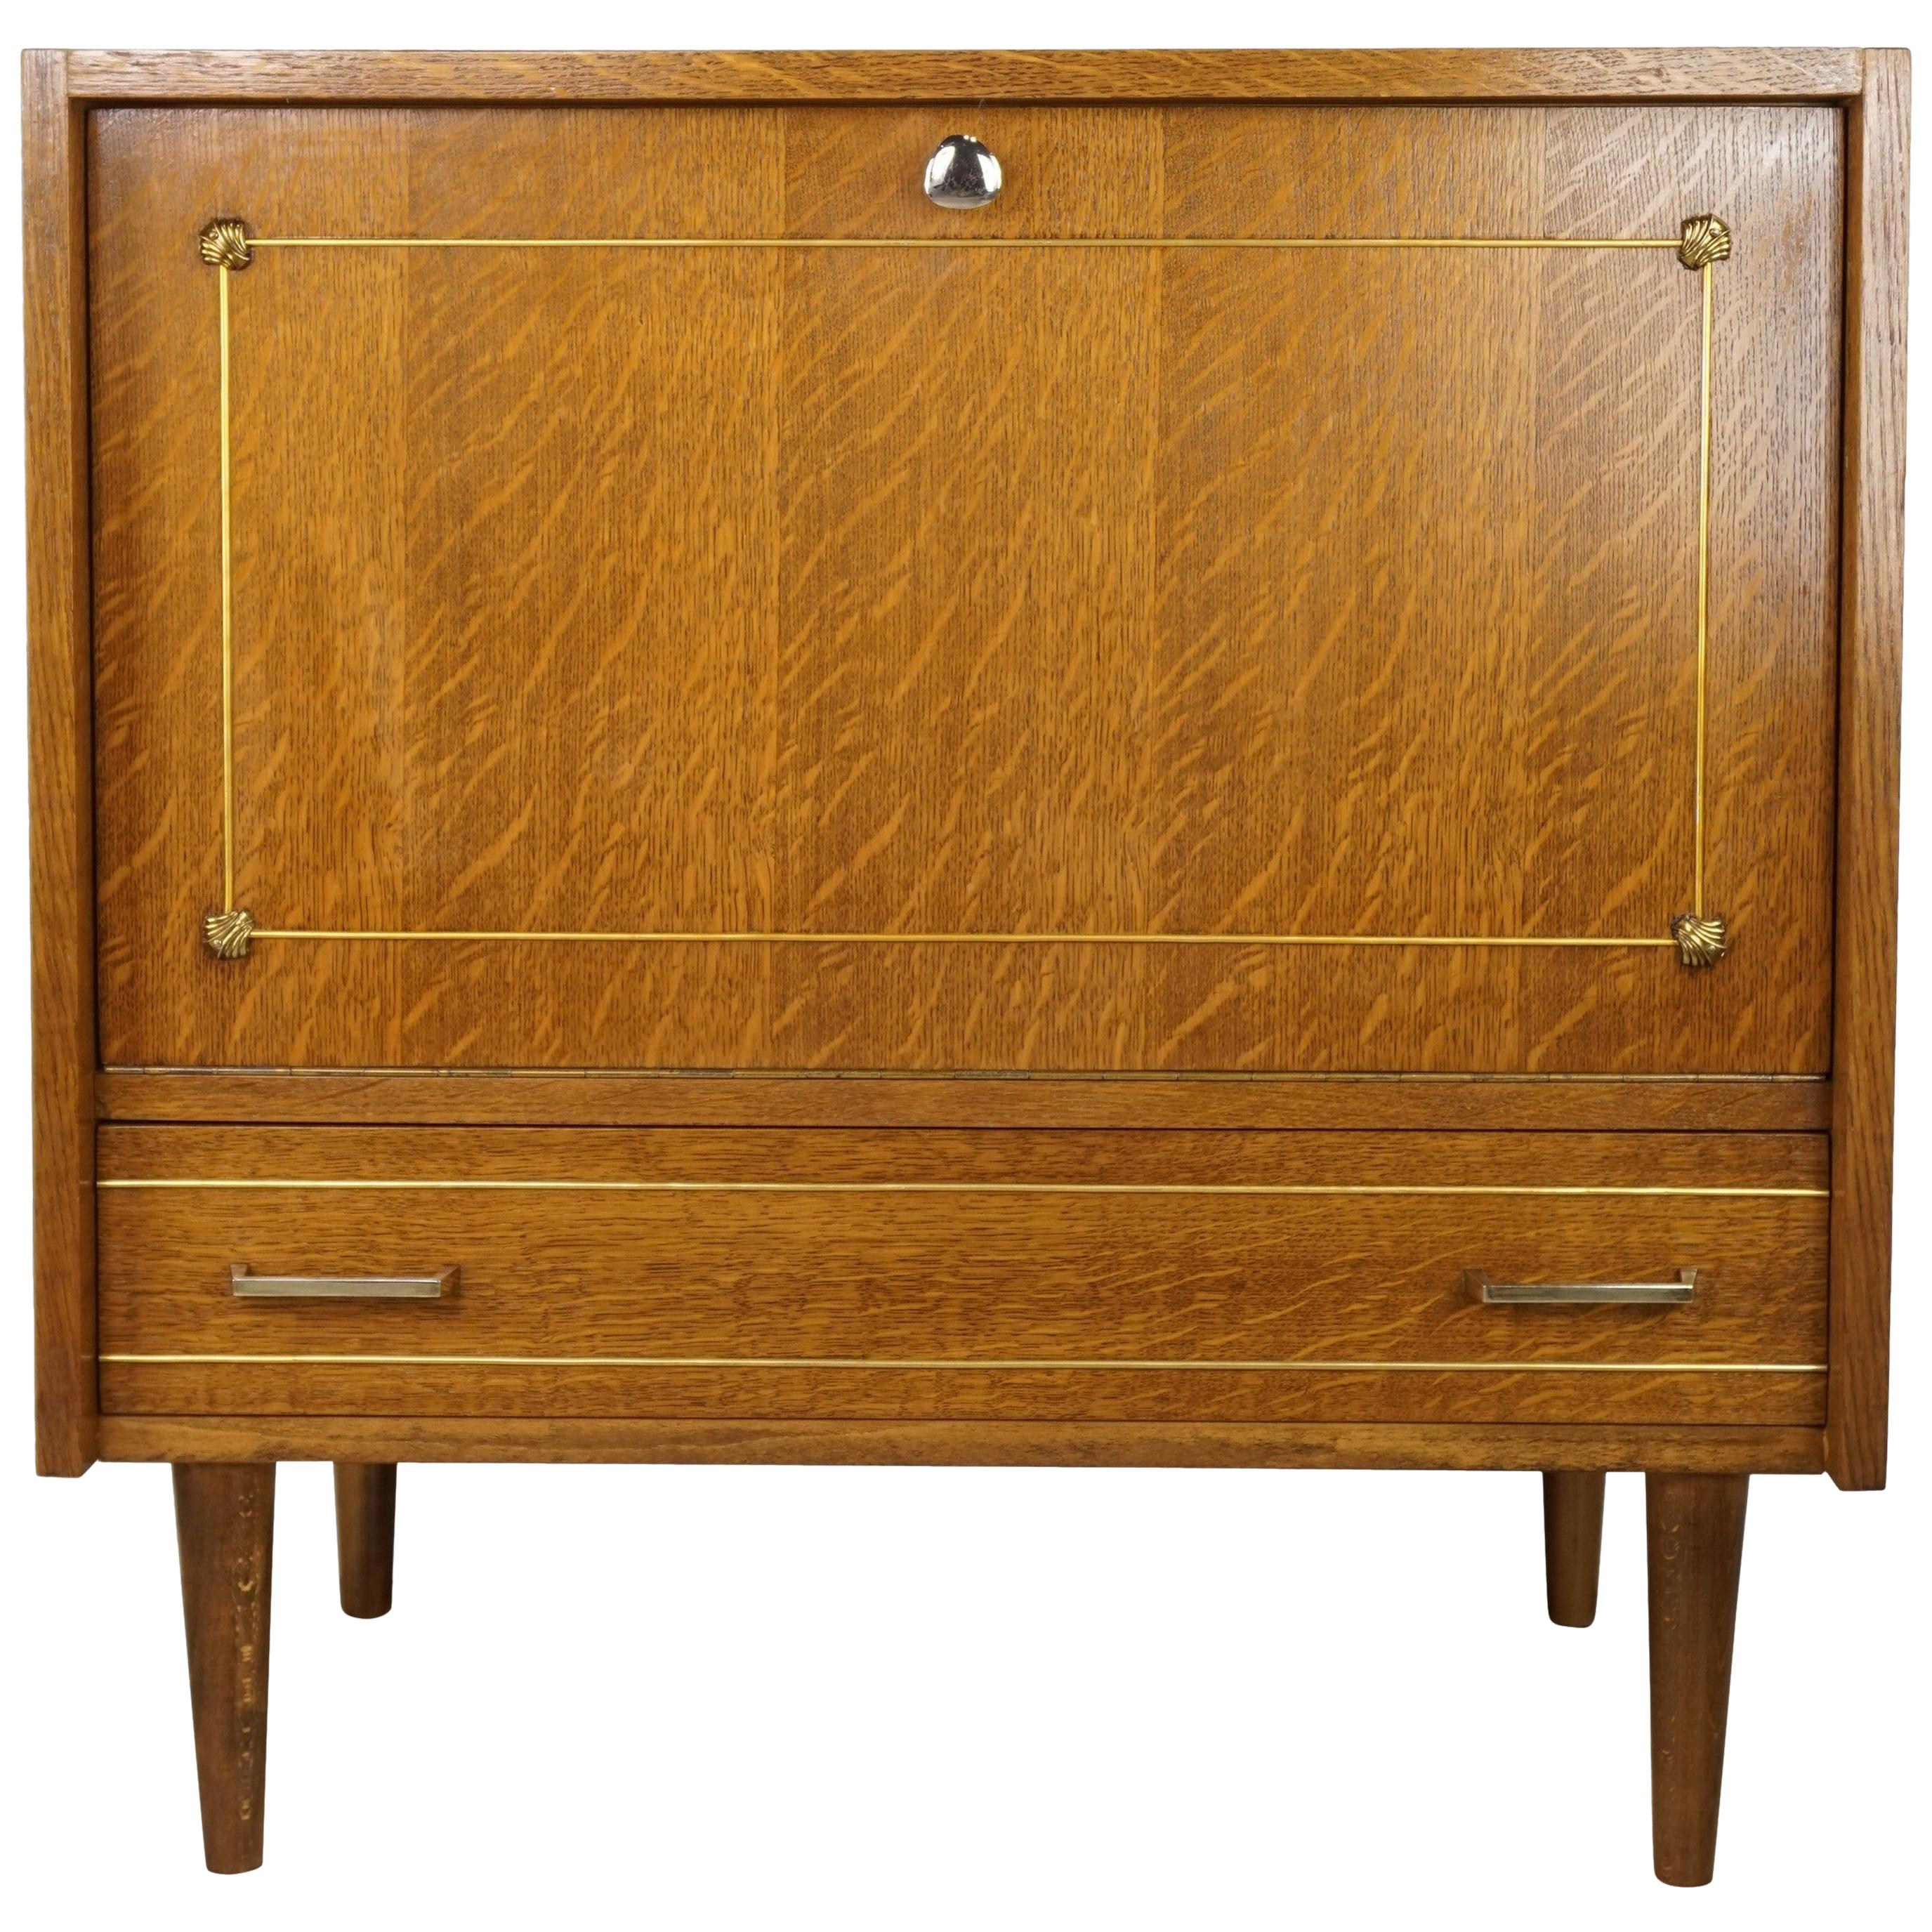 1950s, French Design Oak Wooden and Brass Bar Cabinet